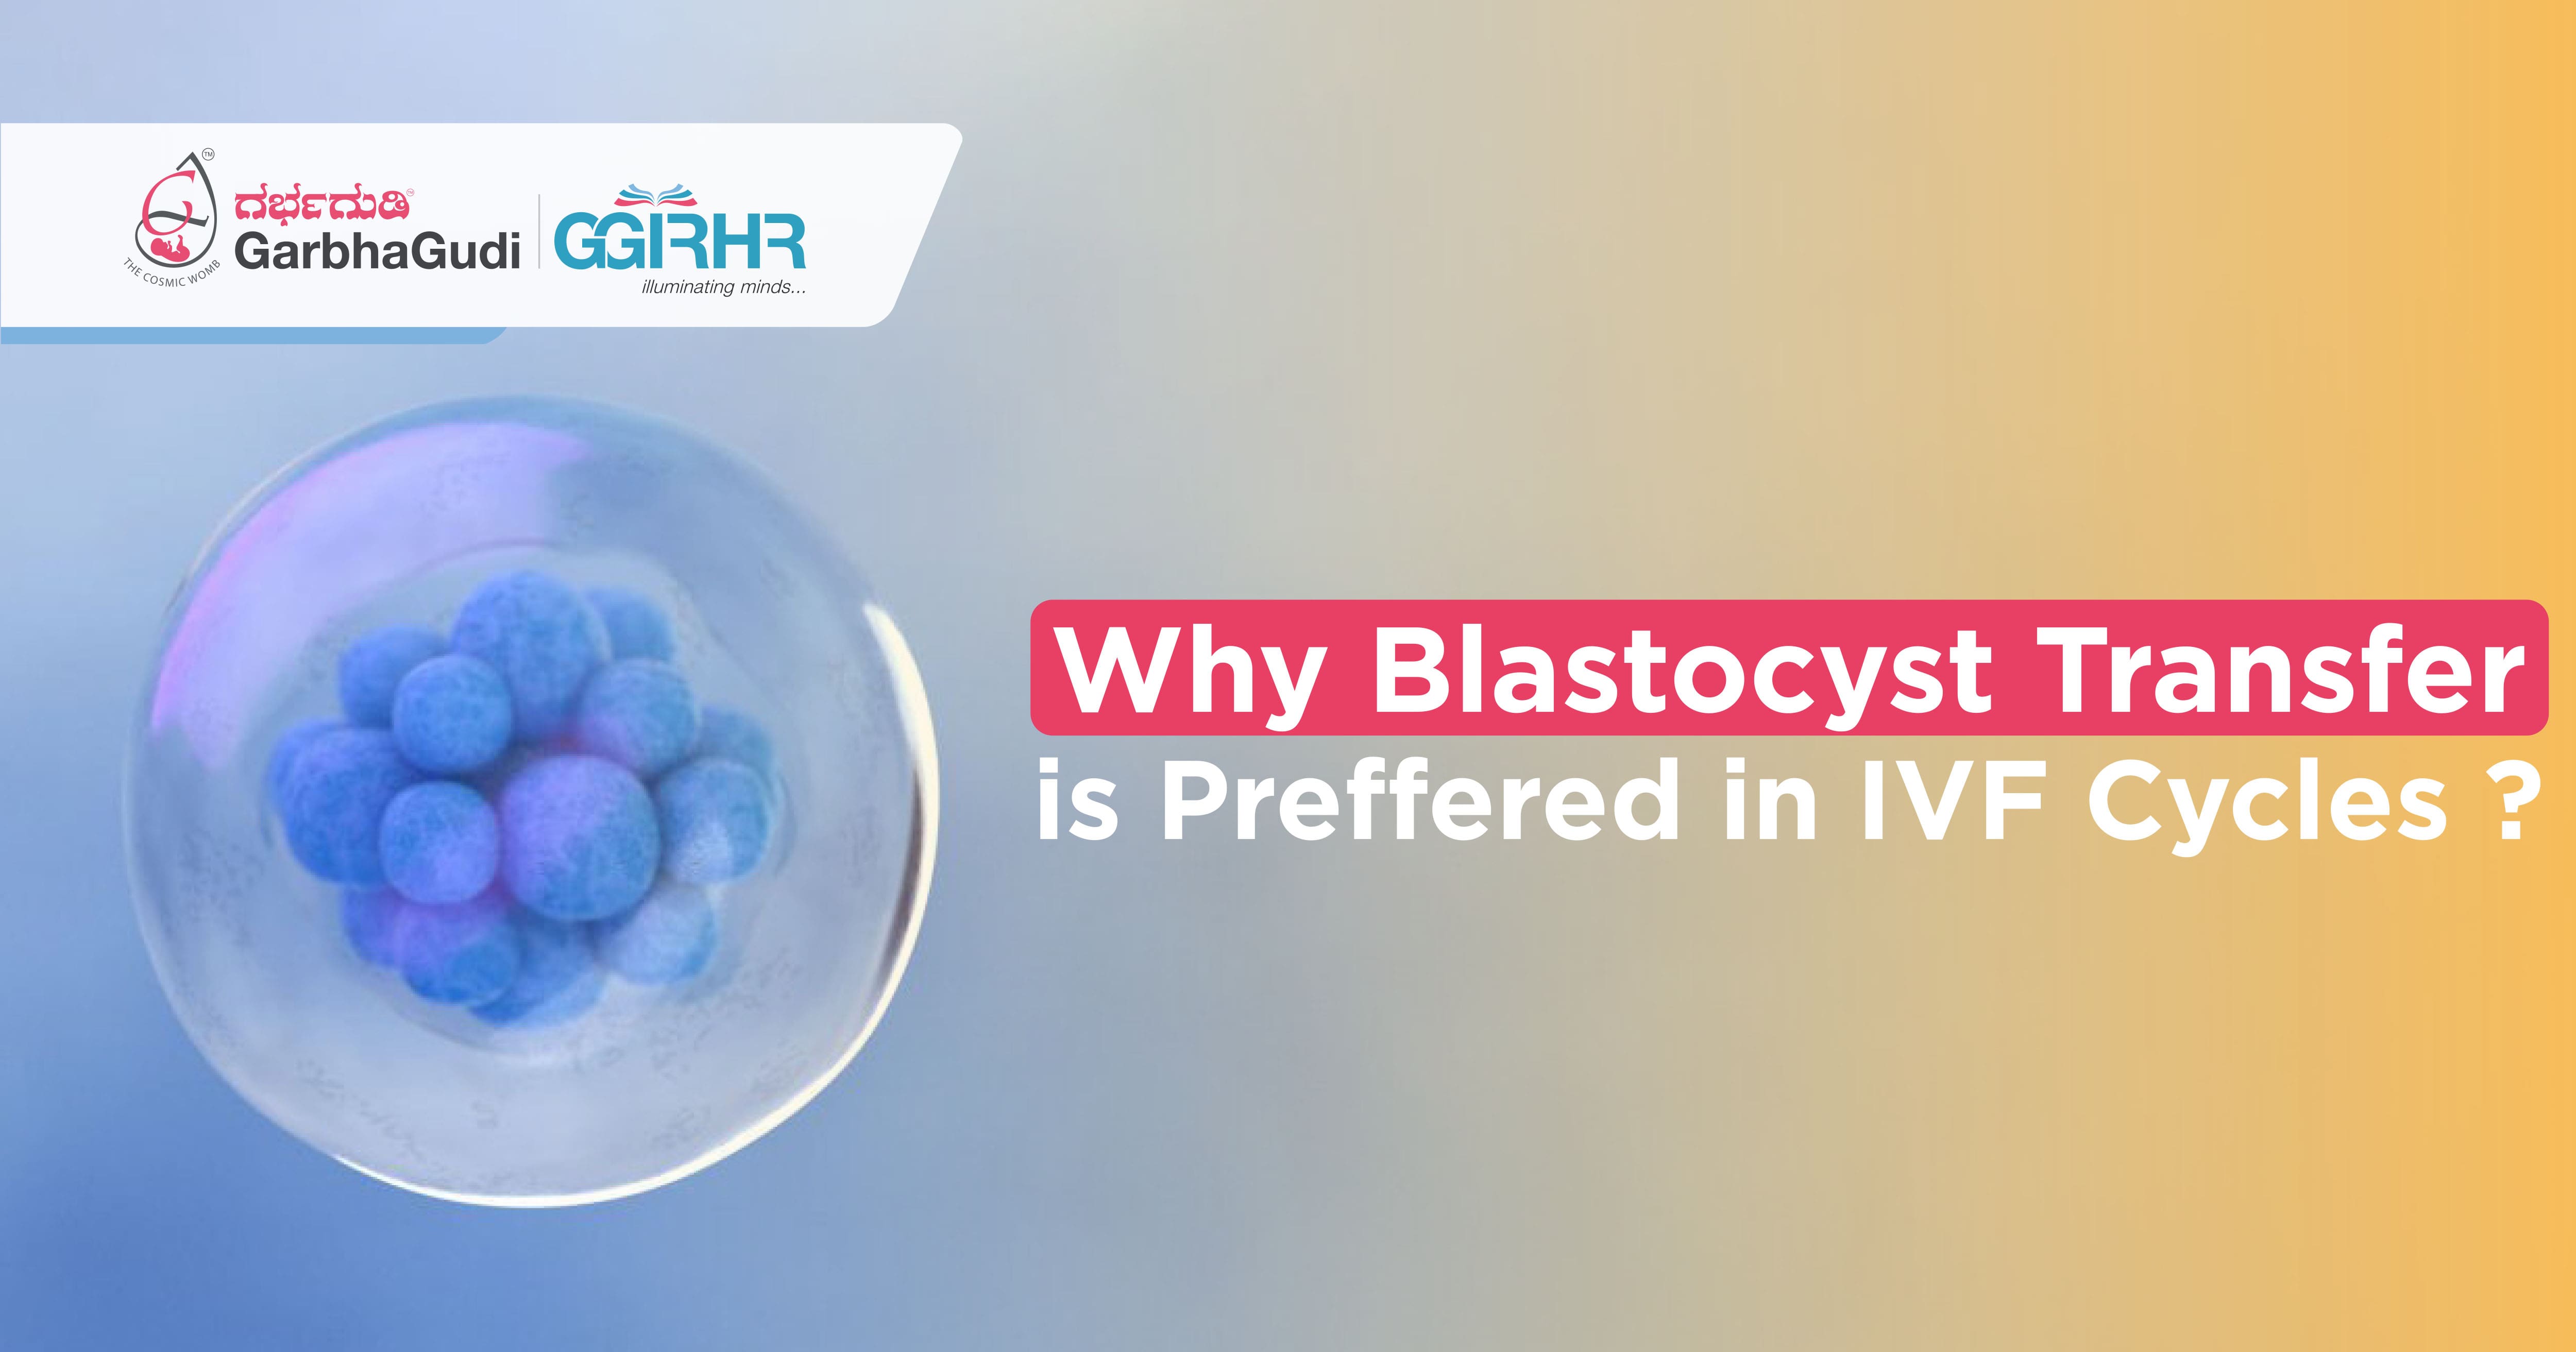 Why Blastocyst Transfer Is Preferred in IVF Cycles?